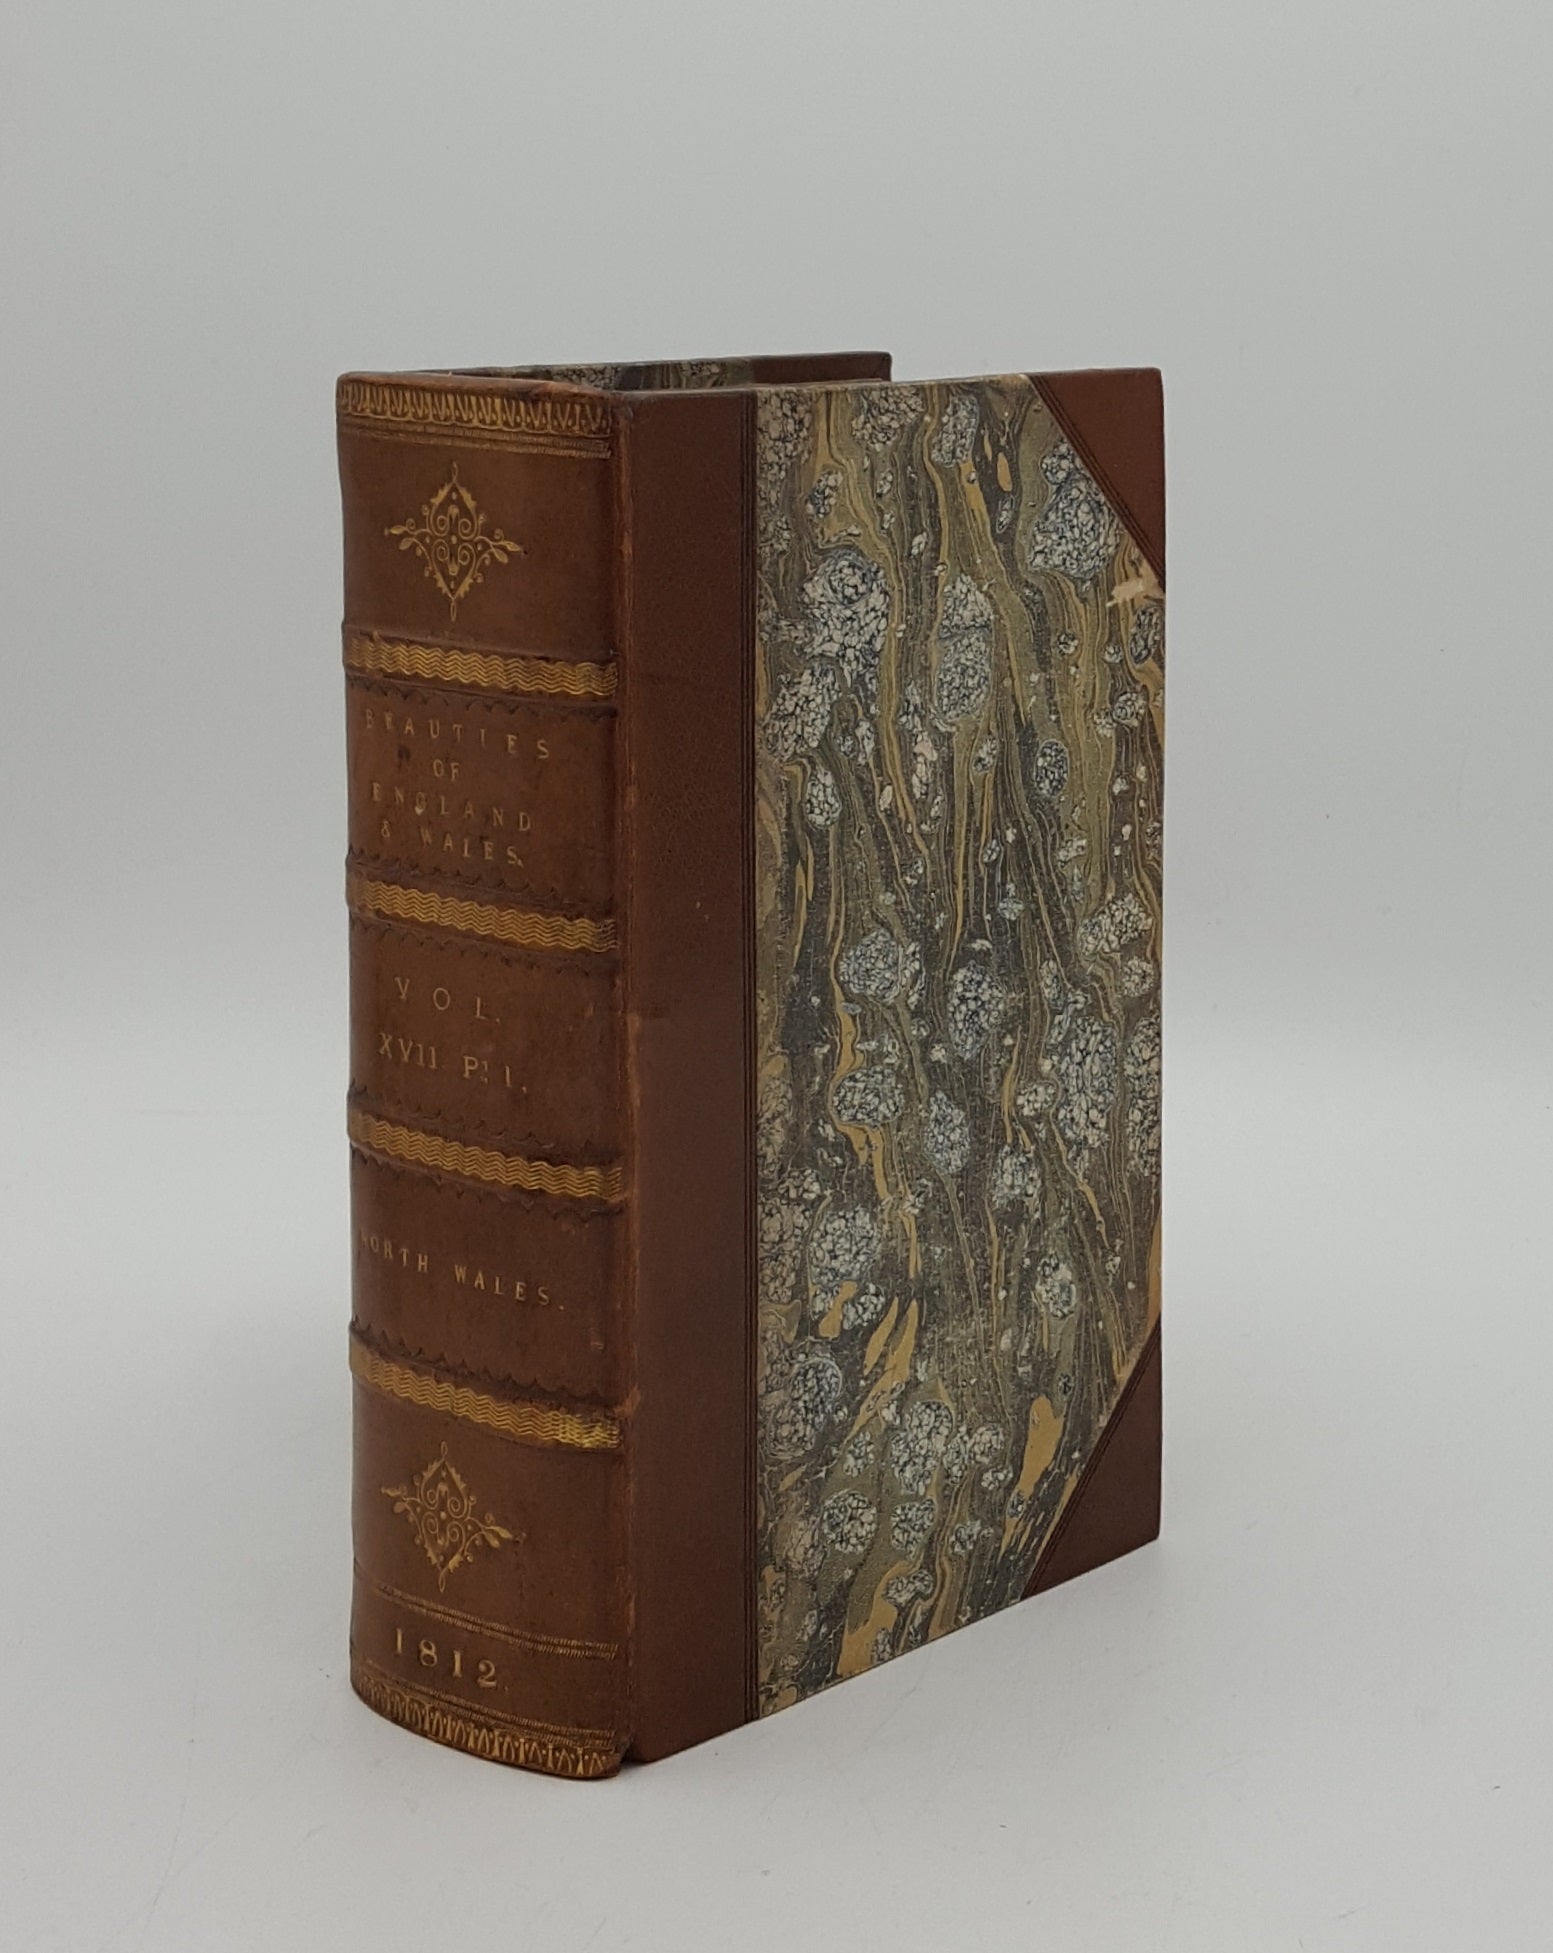 EVANS J. - The Beauties of England and Wales or Original Delineations Topographical Historical and Descriptive of Each County Vol. XVII Part I North Wales